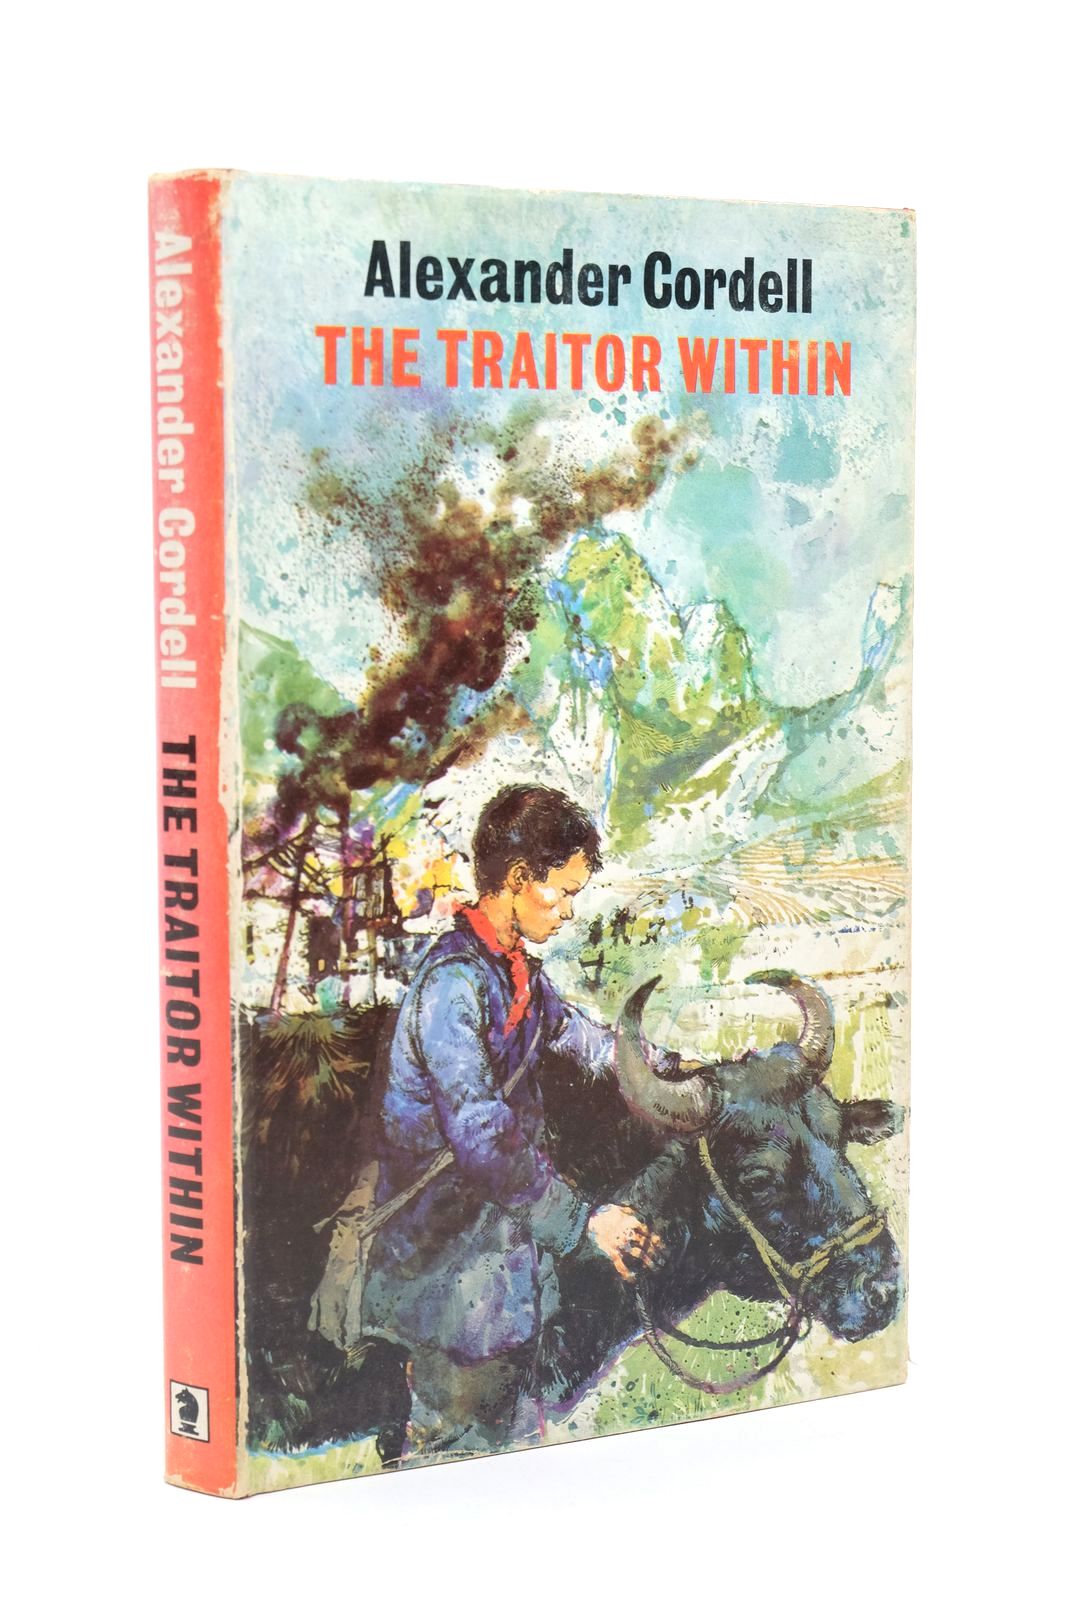 Photo of THE TRAITOR WITHIN written by Cordell, Alexander illustrated by Ambrus, Victor published by Brockhampton Press Ltd. (STOCK CODE: 1323010)  for sale by Stella & Rose's Books